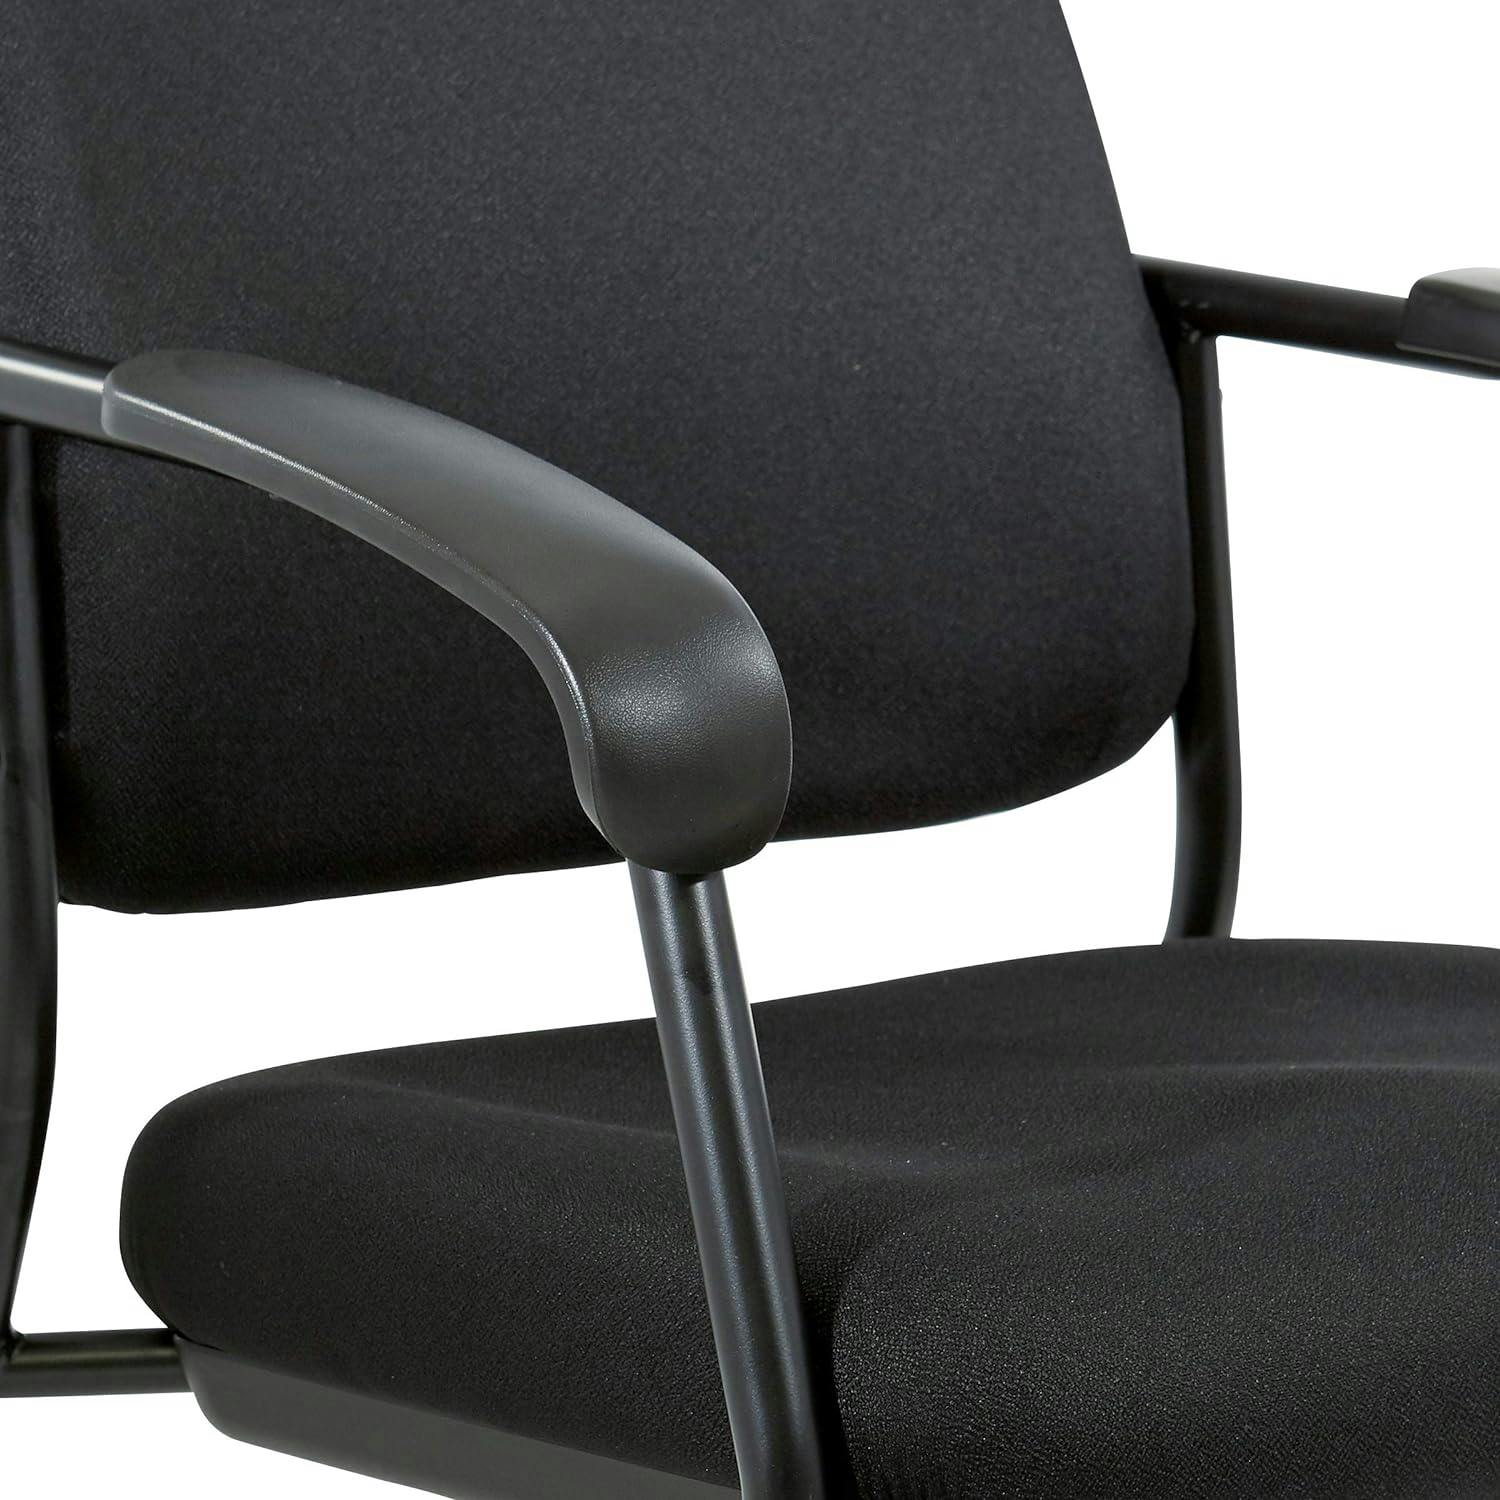 Ergonomic Black Fabric Office Chair with Metal Finish and Padded Armrests